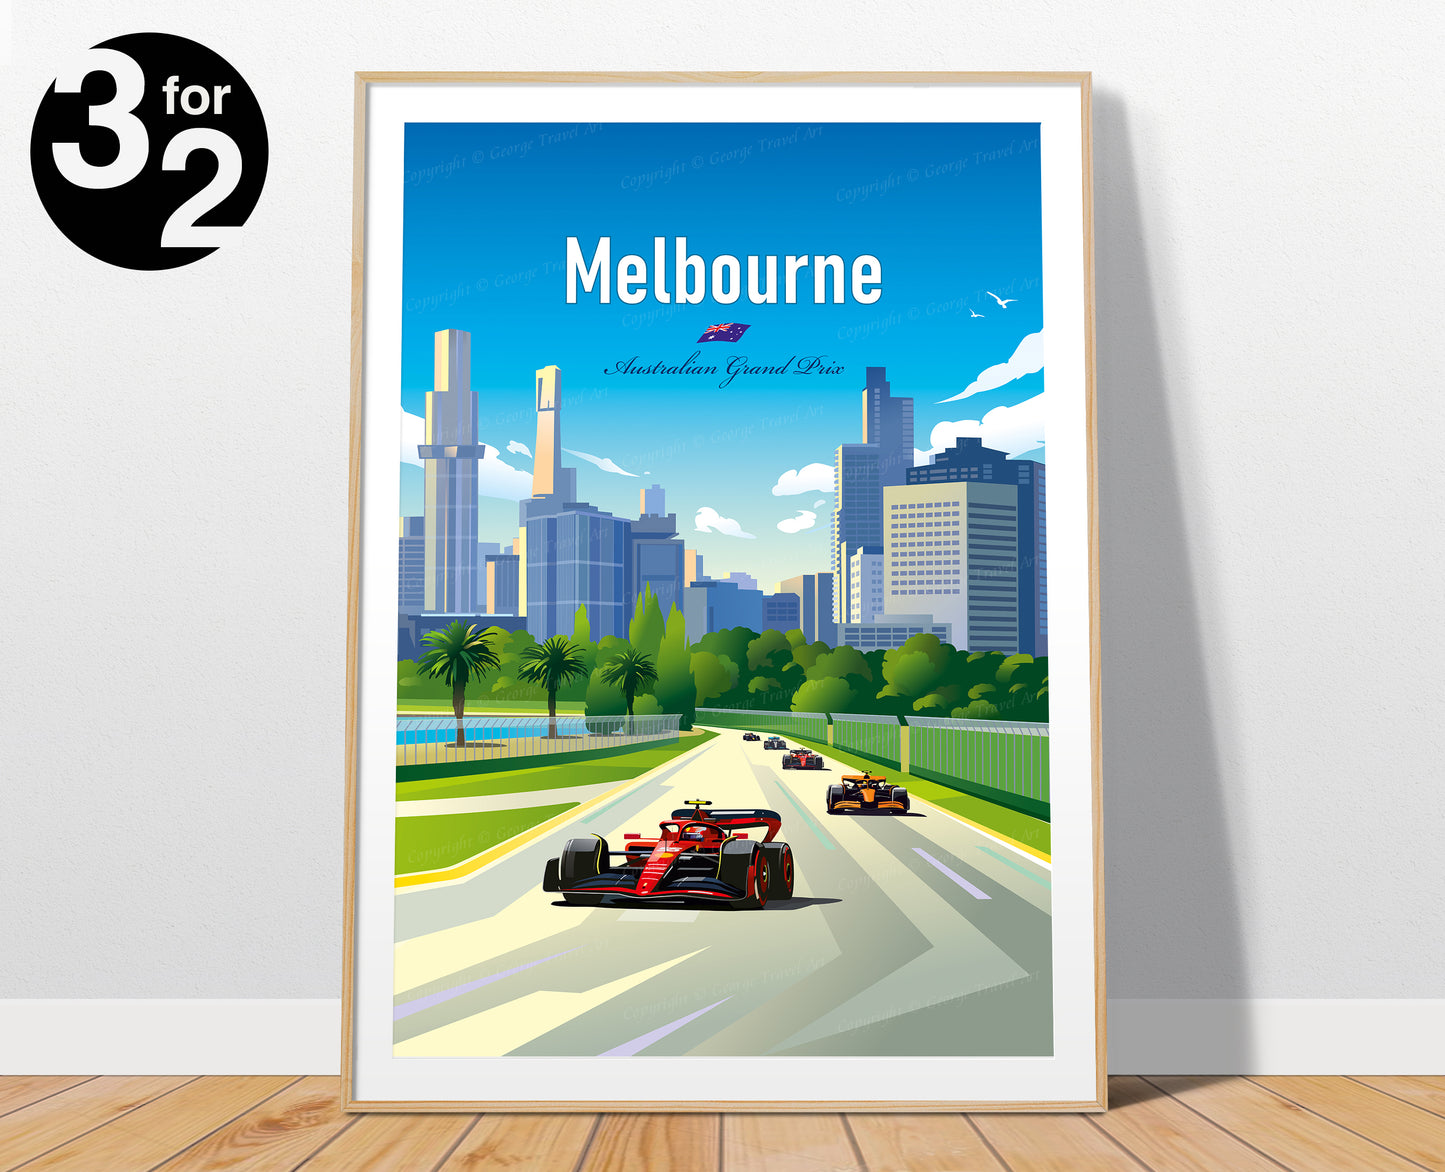 Melbourne F1 Poster showing the iconic Albert Park Grand Prix venue with a red Ferrari race car. The skyscrapers of the city can be seen in the background.